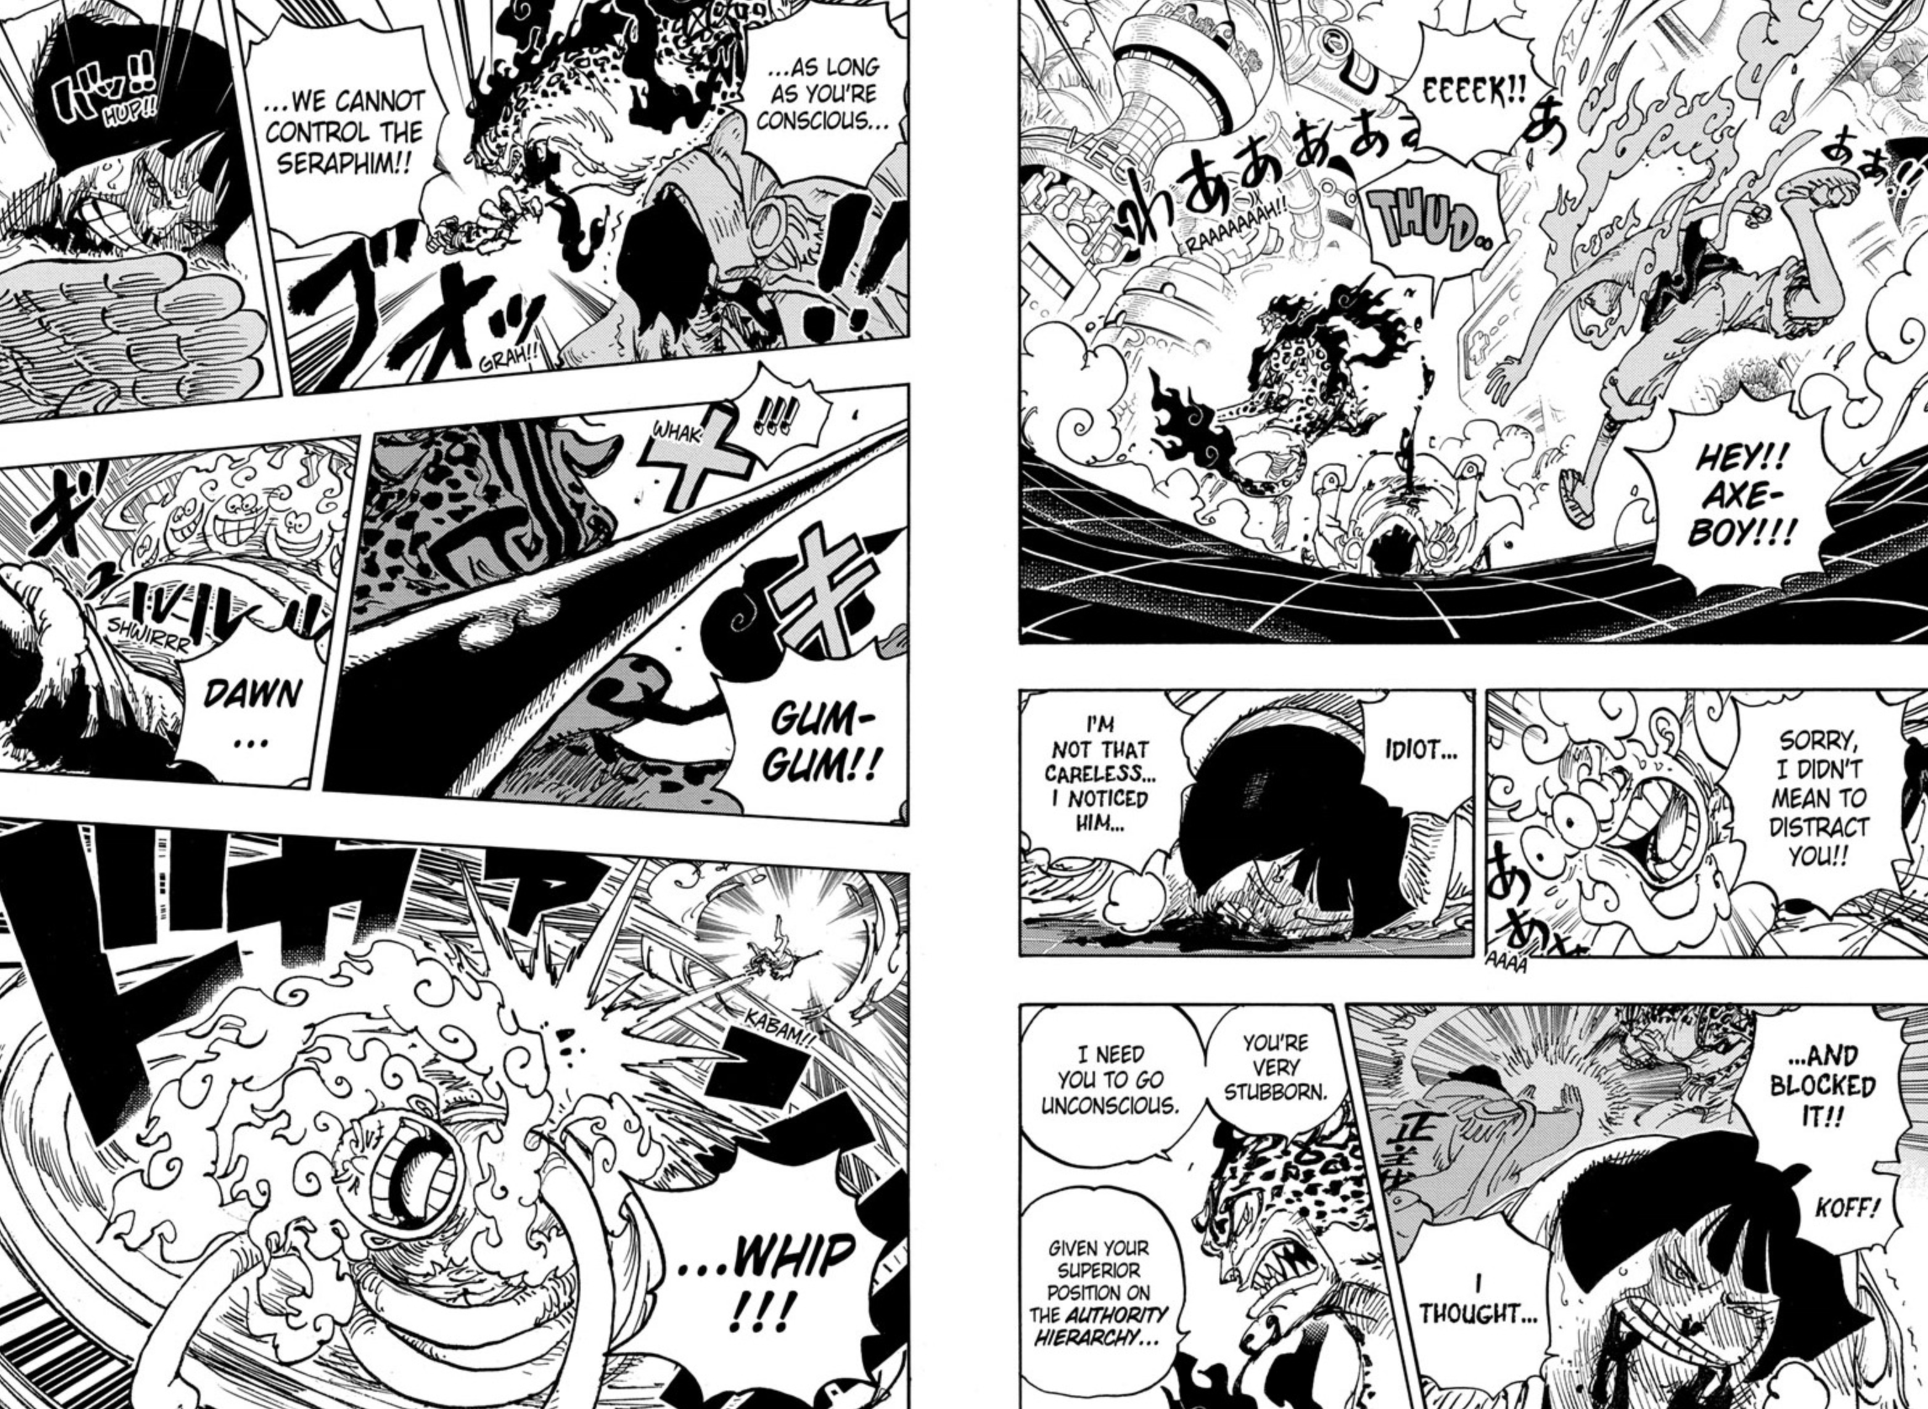 One Piece Chapter 1070 Pages 2-3